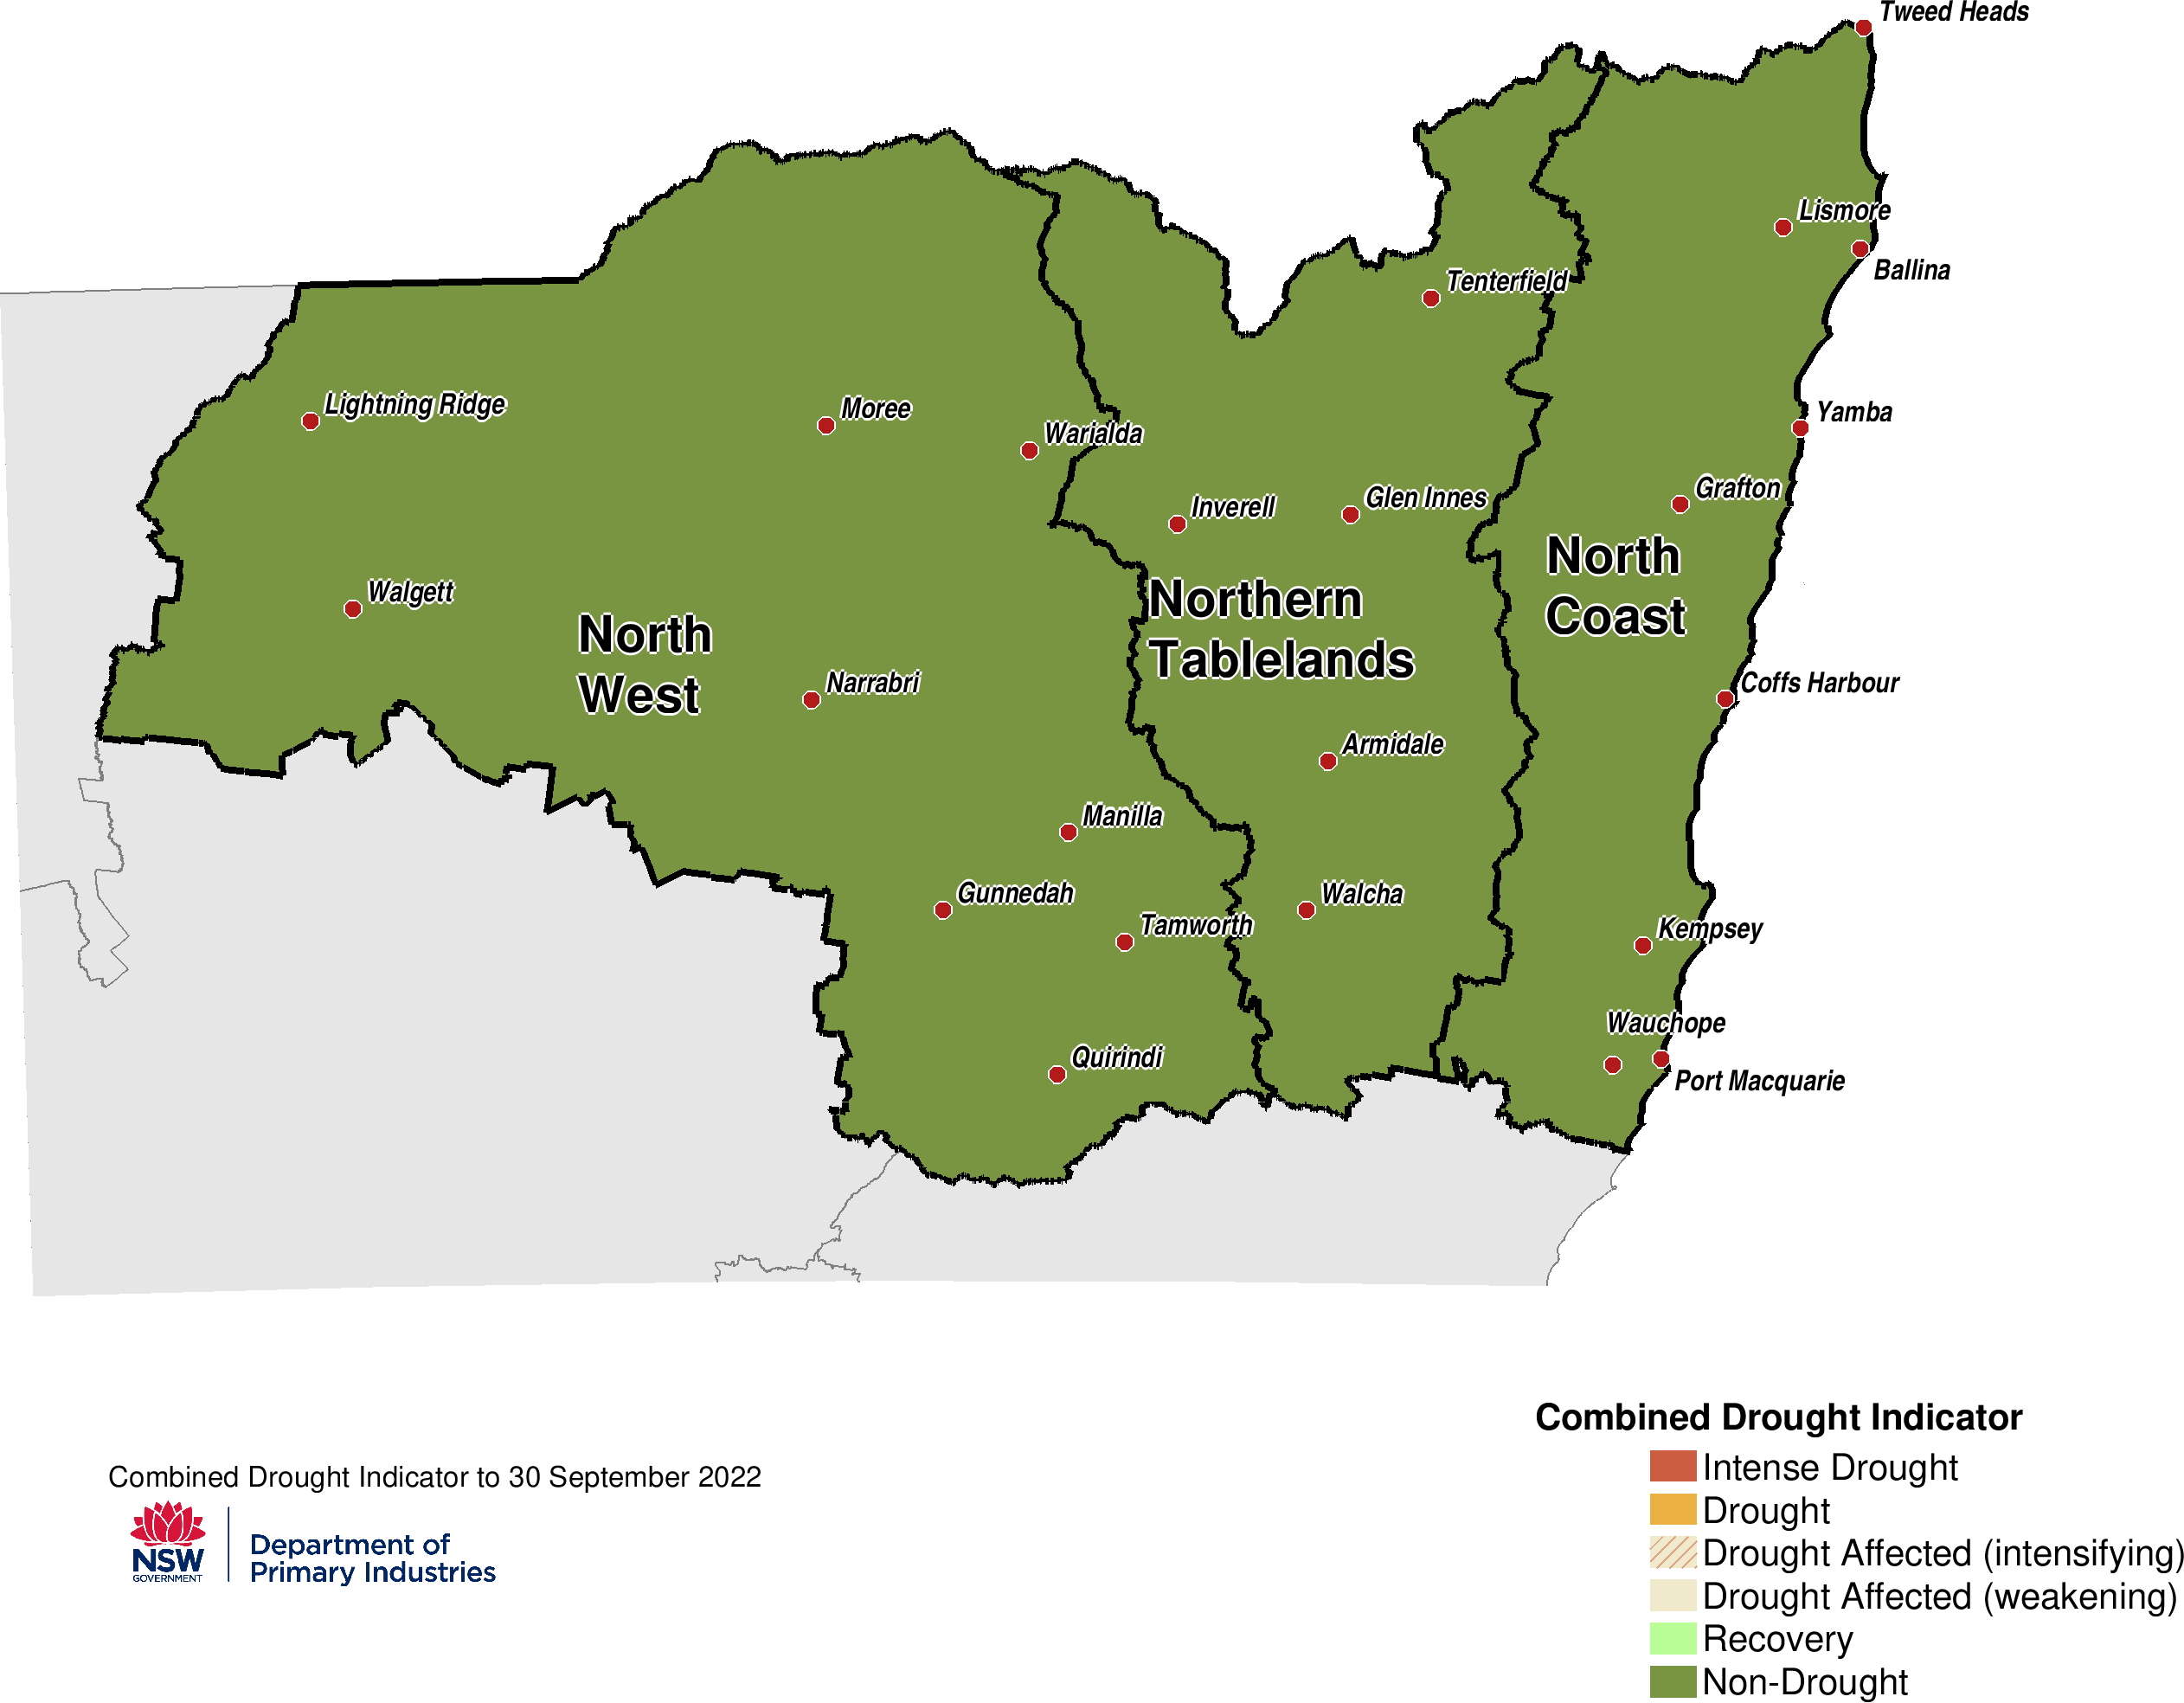 Figure 17. Combined Drought Indicator for the North West, Northern Tableland and North Coast regions 